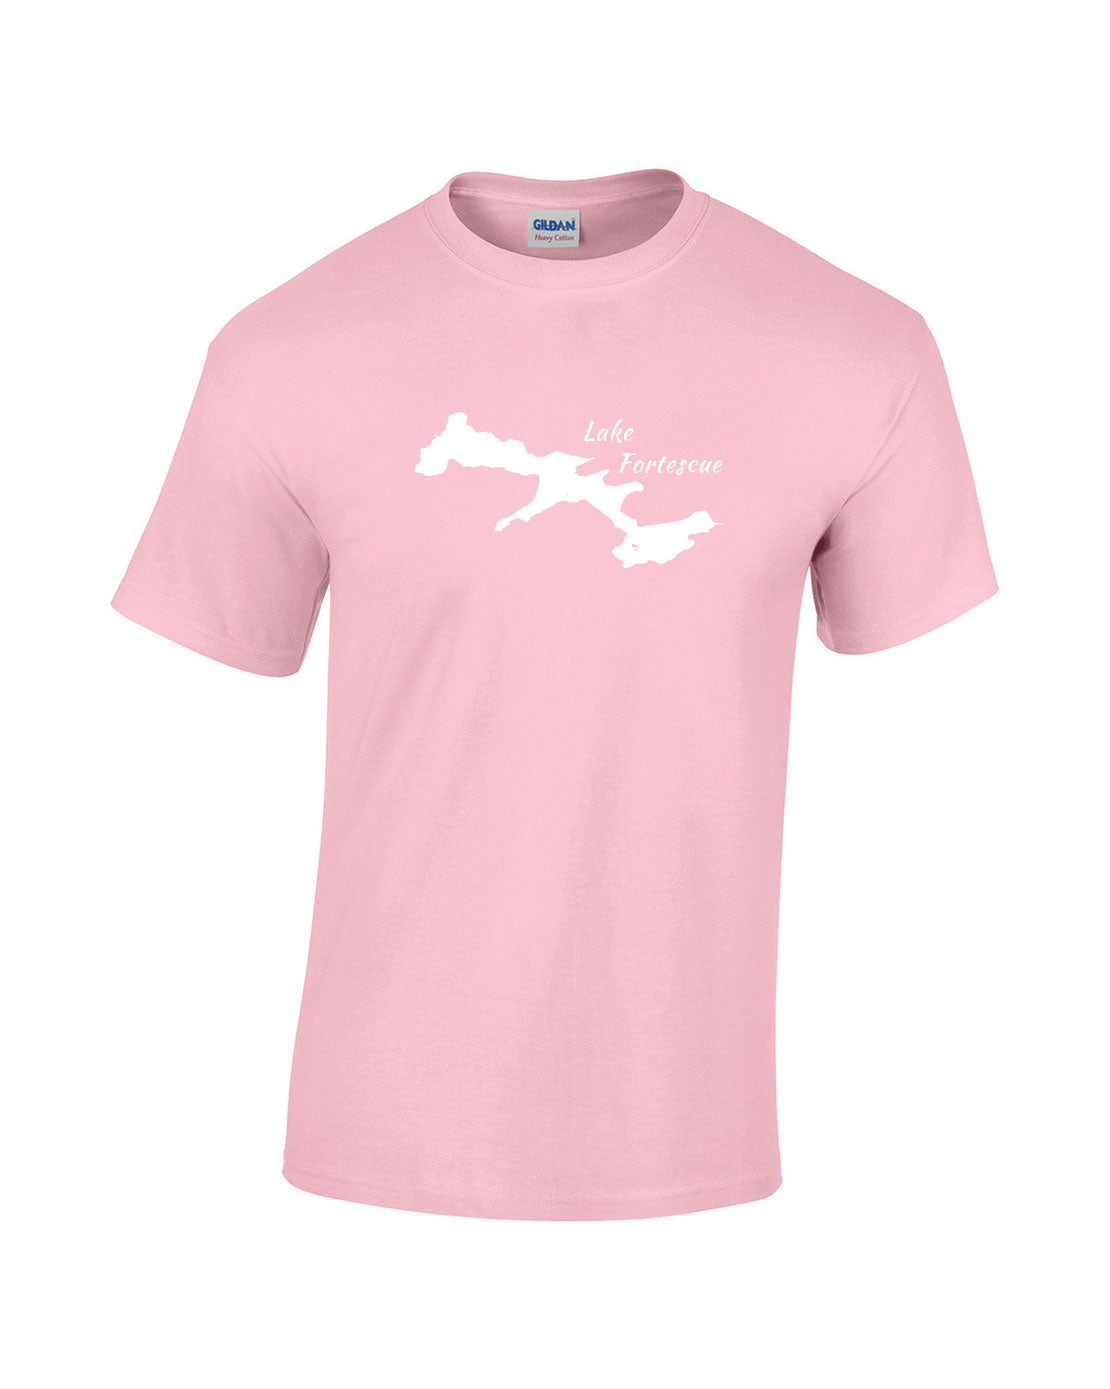 Lake Fortescue T-Shirt